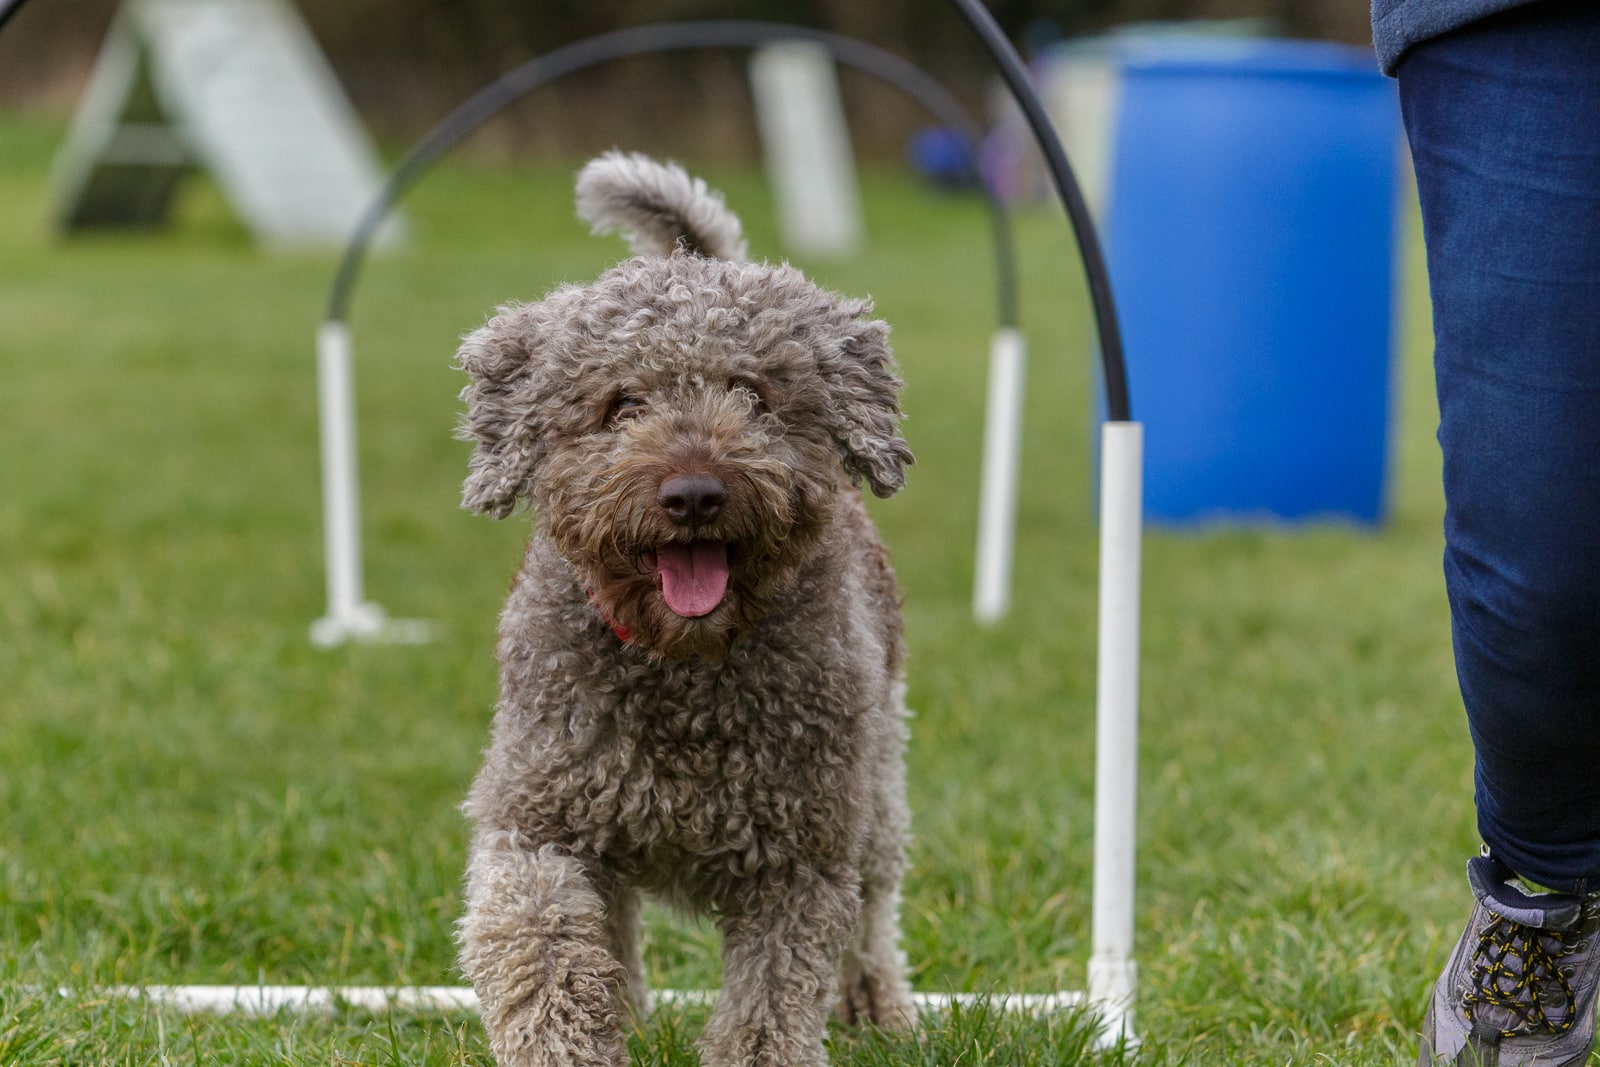 Lagotto Romagnolo dog taking part in Hoopers class training